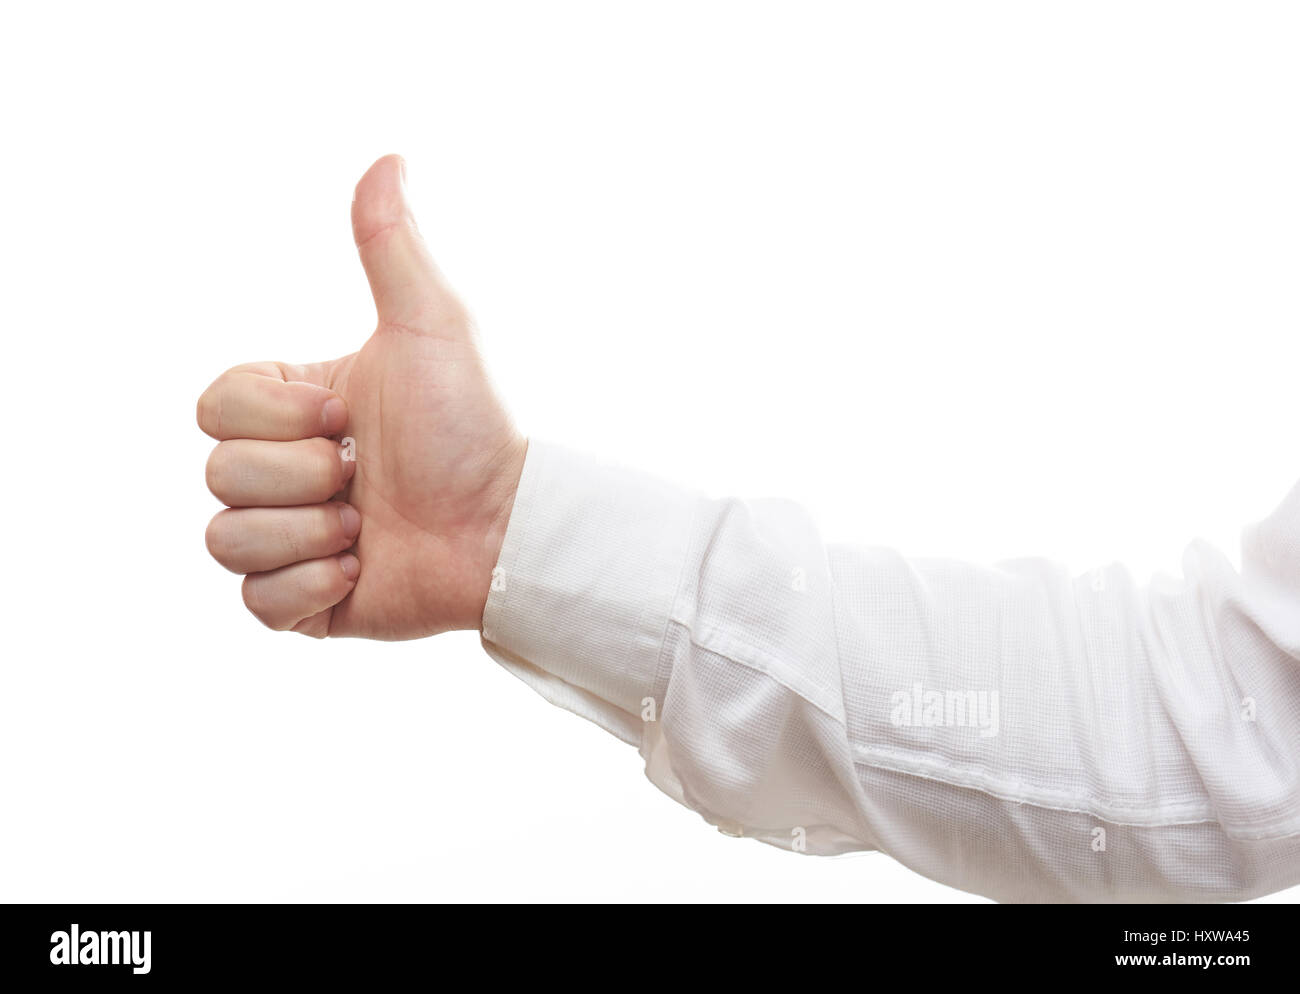 Thumb up isolated close-up on white background. Sign of success Stock Photo